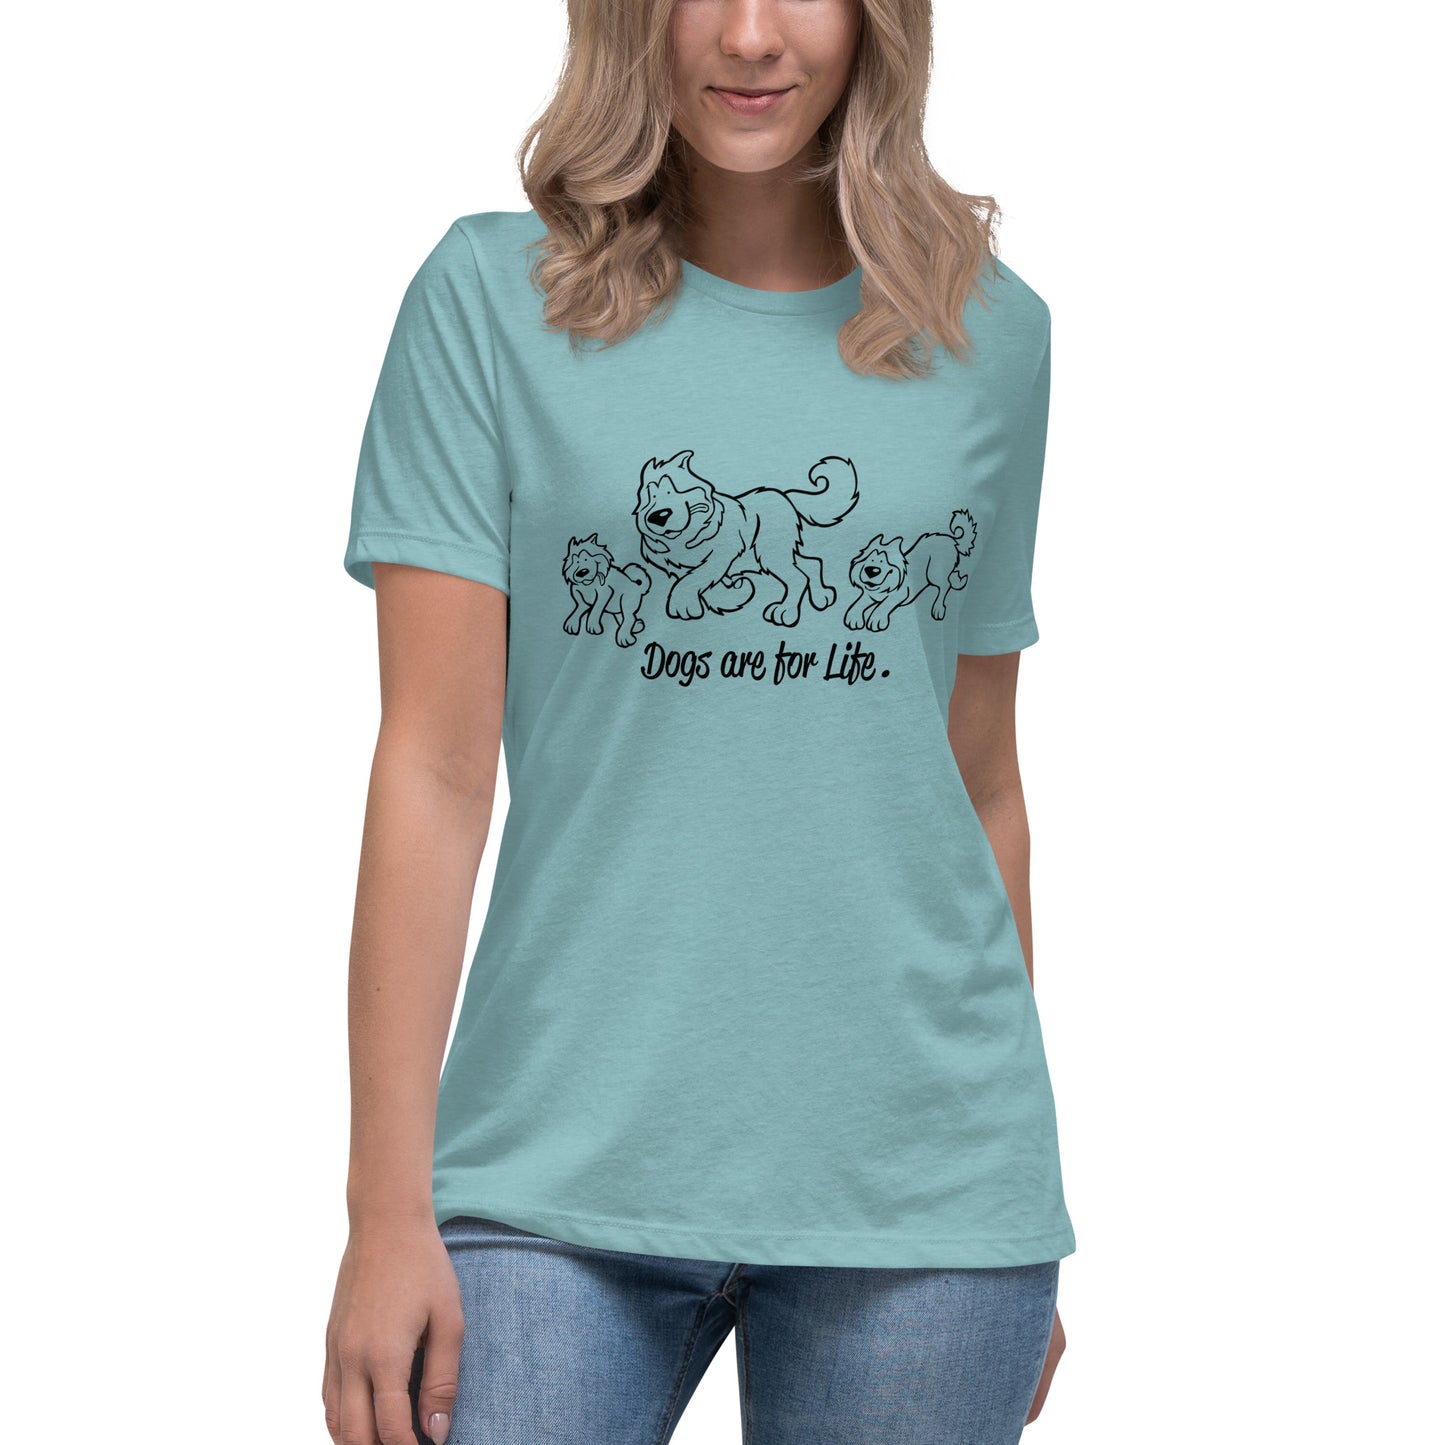 Dogs Are For Life - Alaskan Malamute Ladies T-Shirt